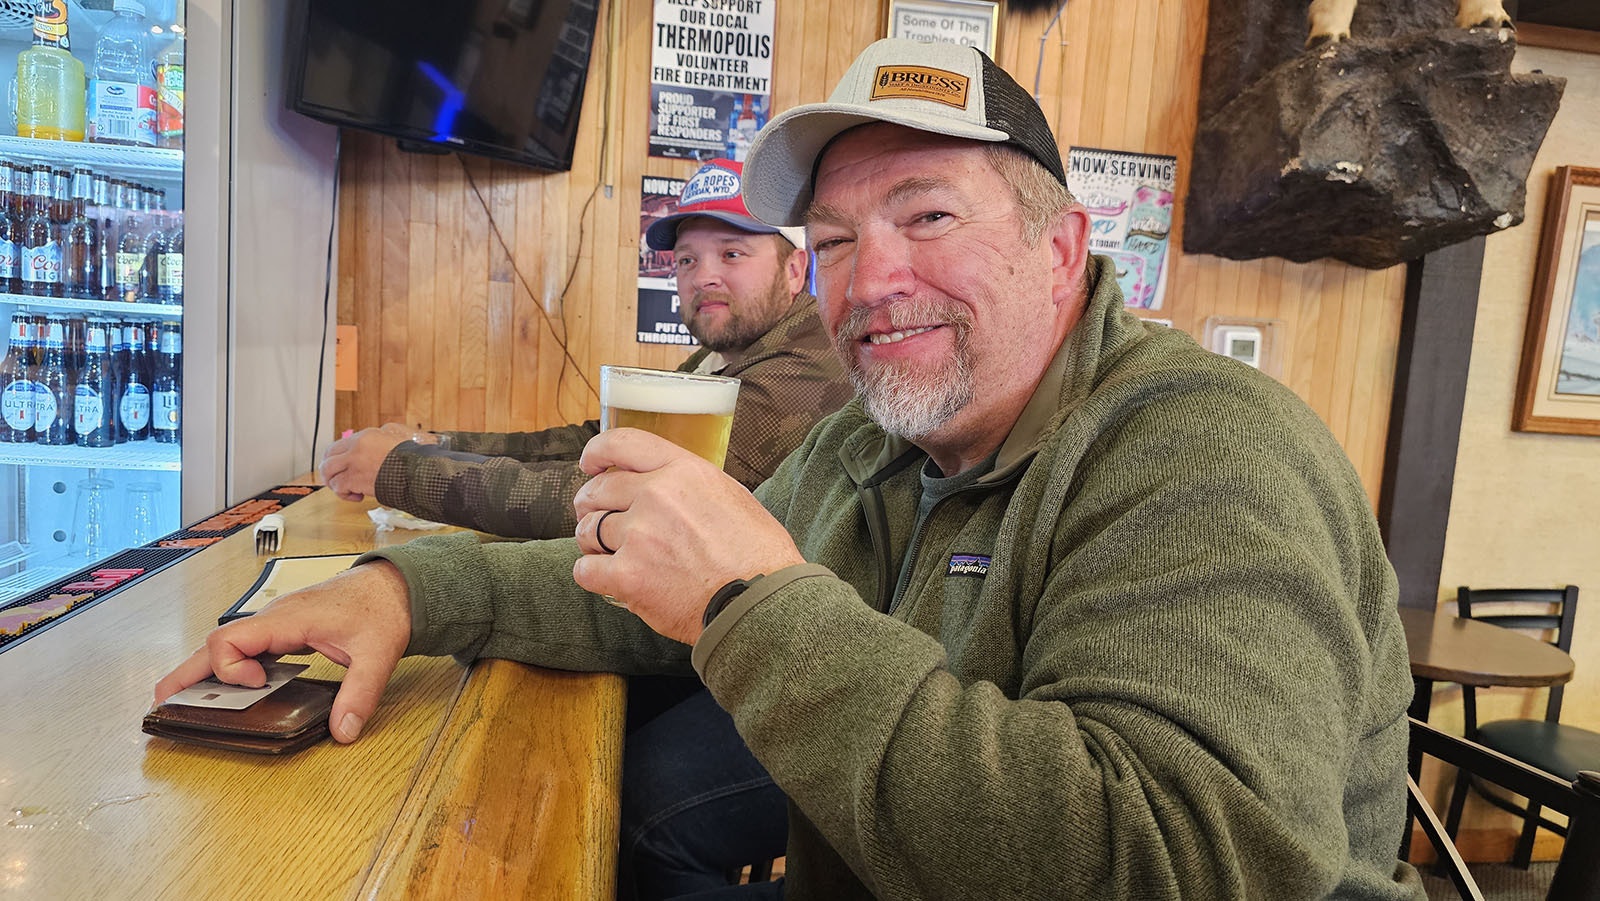 Paul Dey, official and certified beer judge, enjoying a Jeremiah Johnson Brewing Co. beer at The Safari Club restaurant in Thermopolis.